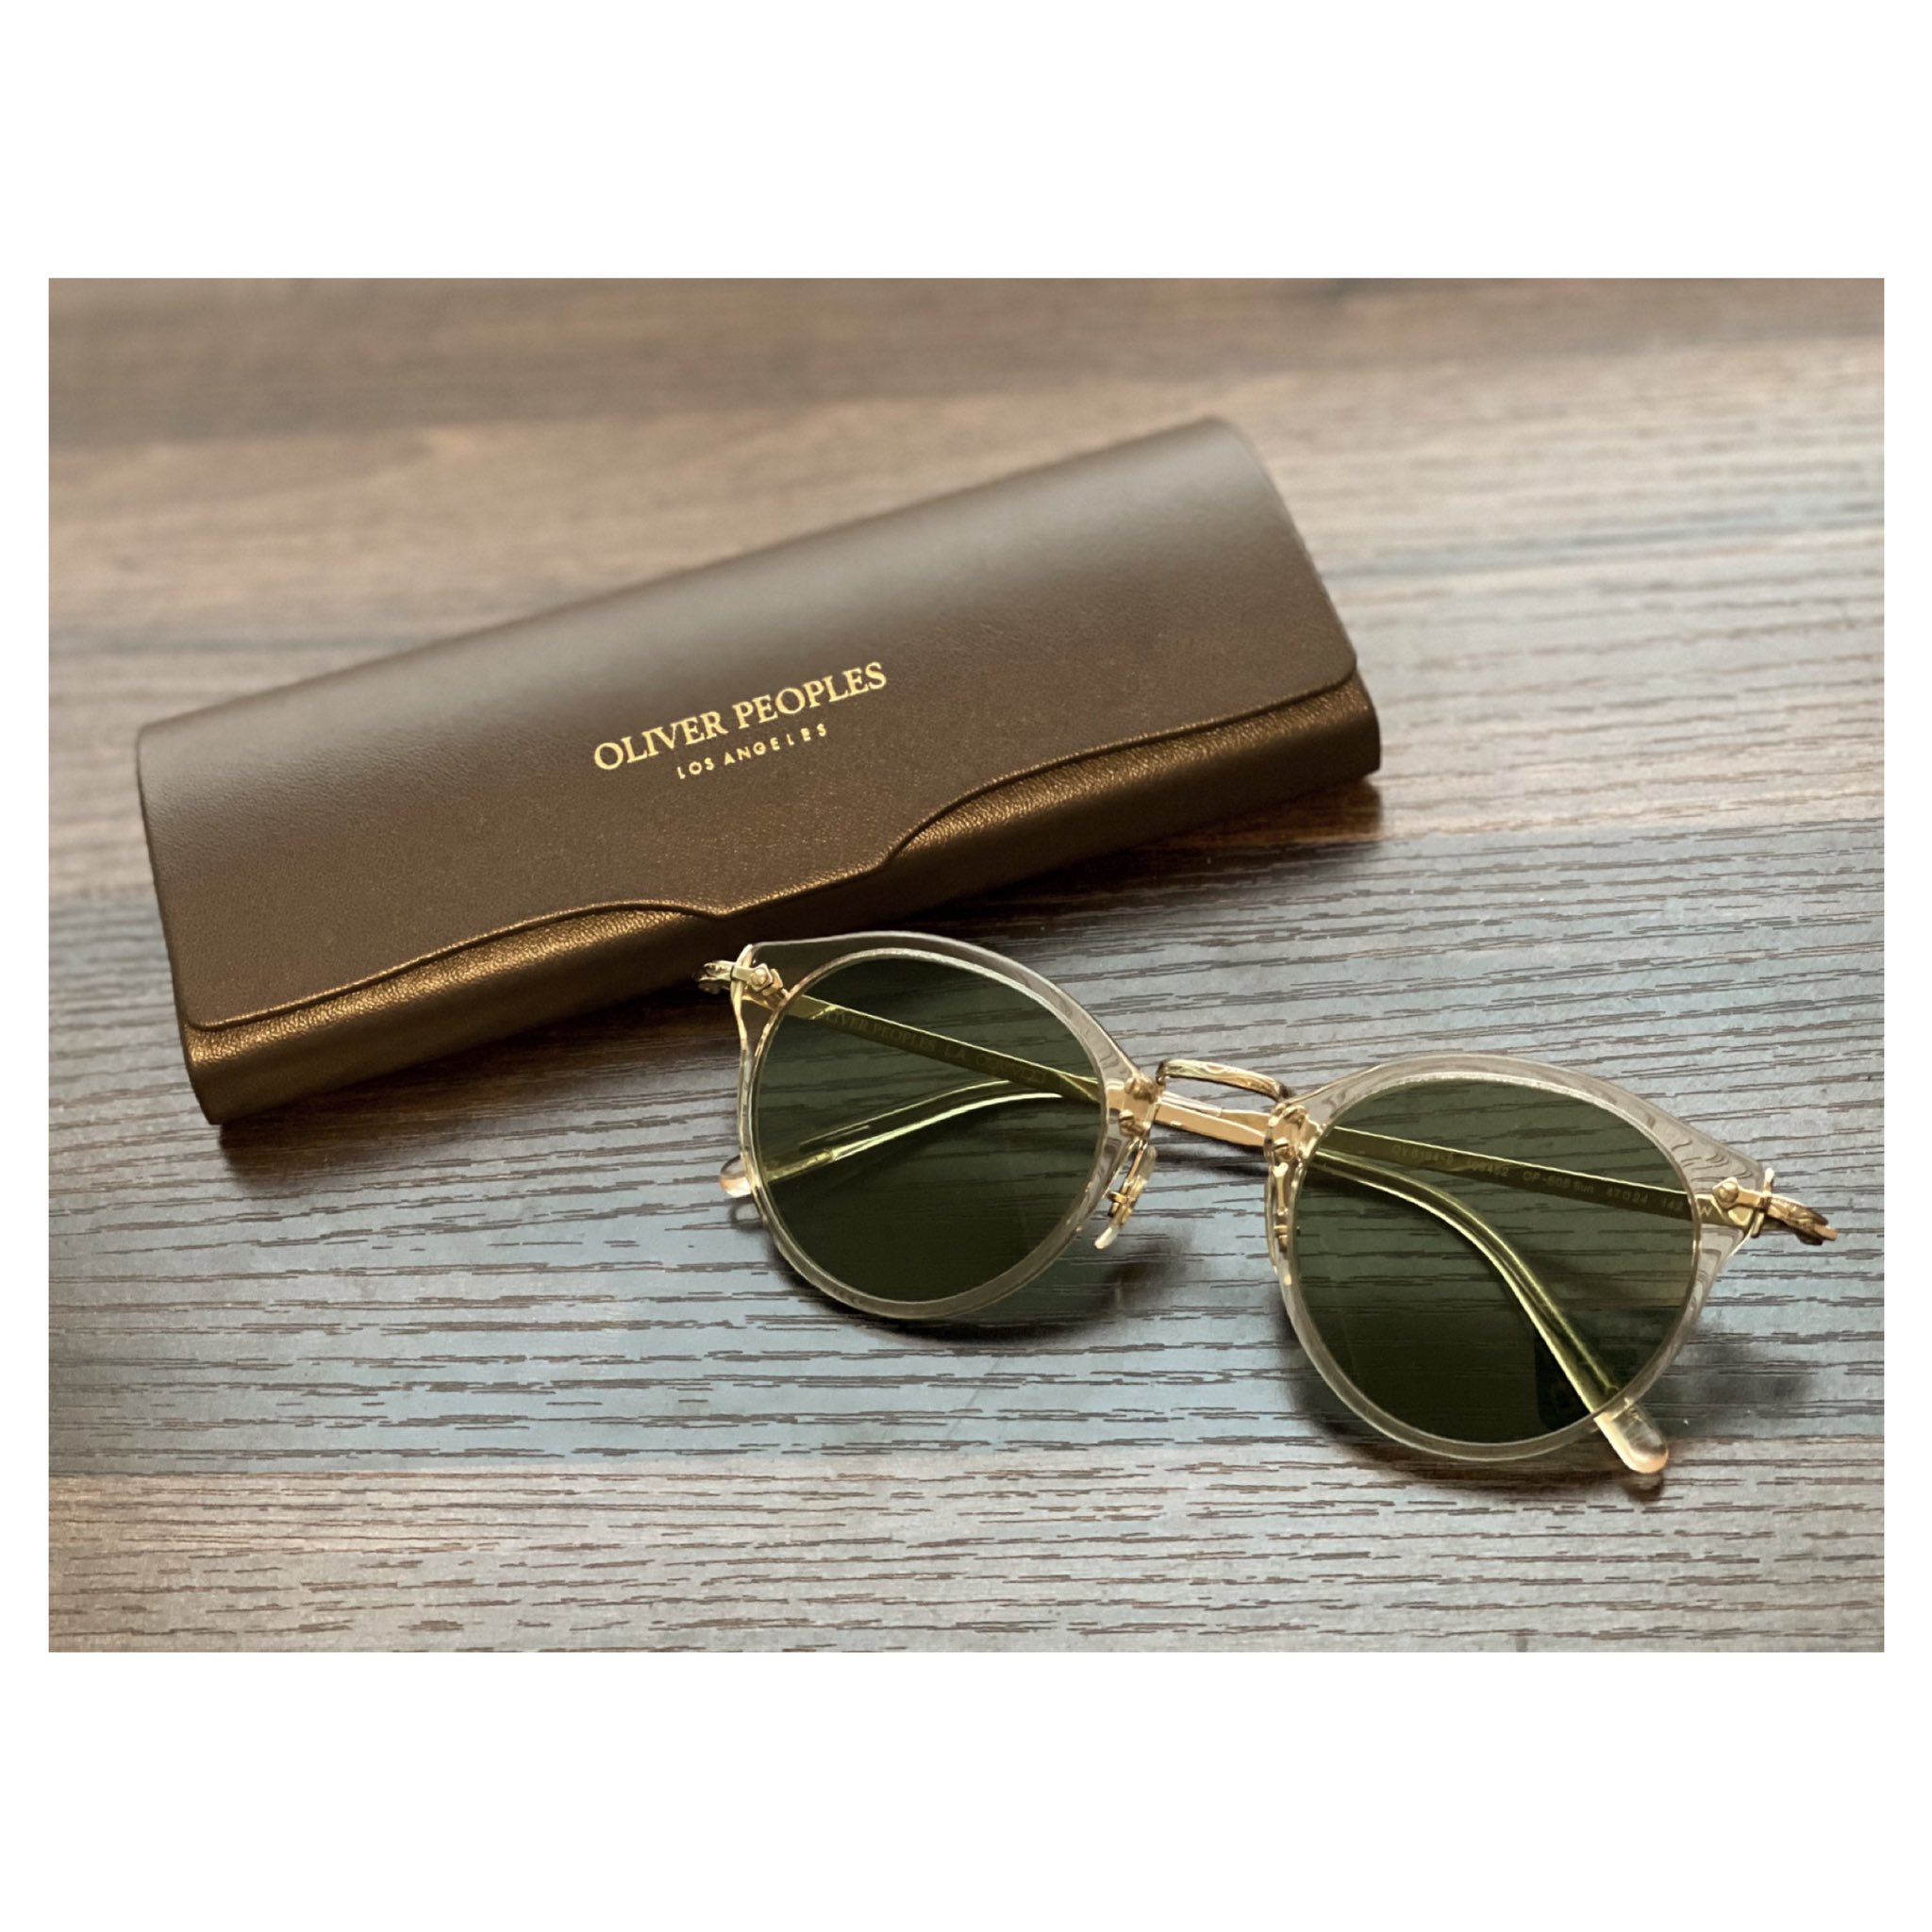 OLIVERPEOPLES - Twitter Search / Twitter